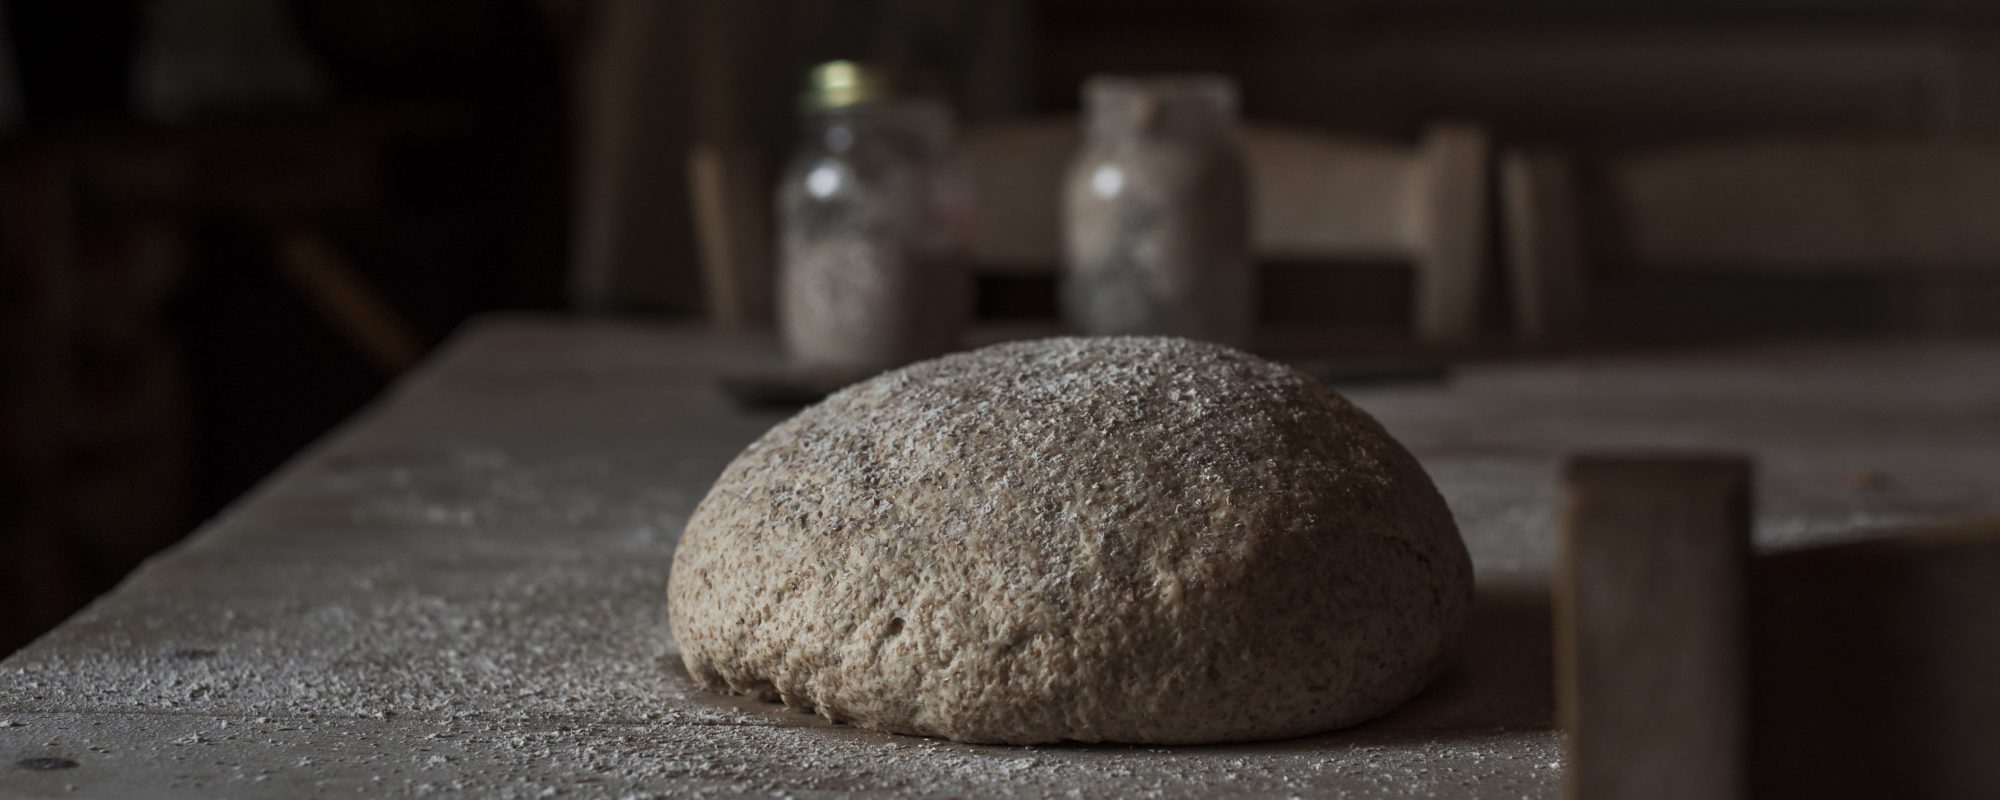 baking in italy  - bread a the kitchen table